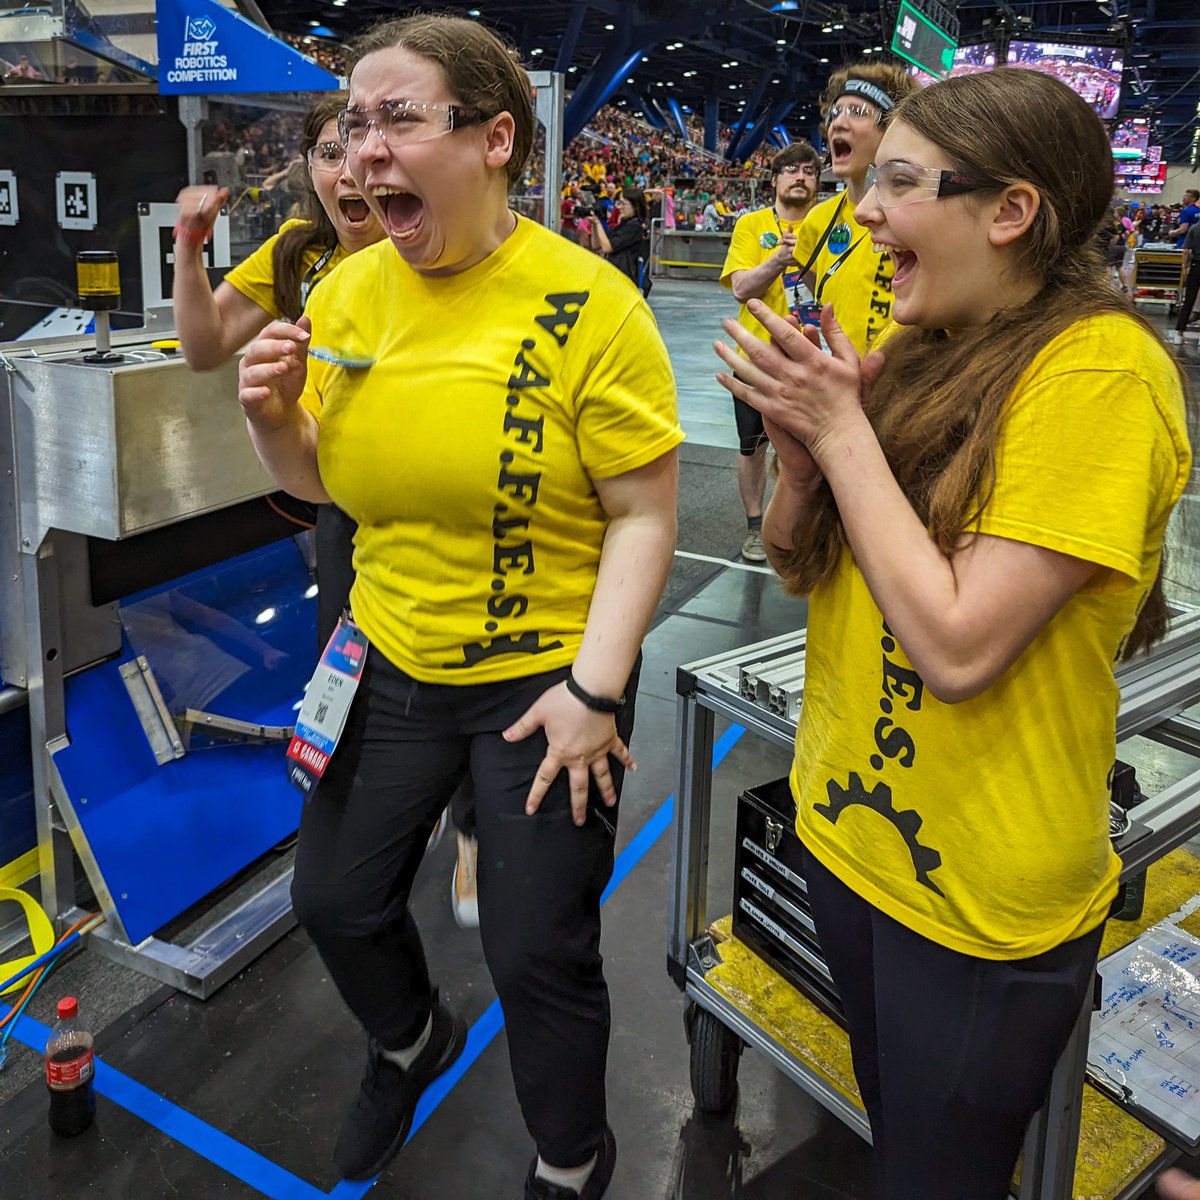 Our season really came to a Crescendo. Winning the Curie Division as the 8th alliance with @frc2590, #frc7028 and @team190, we went to Einstein and finished 5th in the world.

Easily the best season in our history. Thank you all for the support 💛 #omgrobots #firstinspires #frc